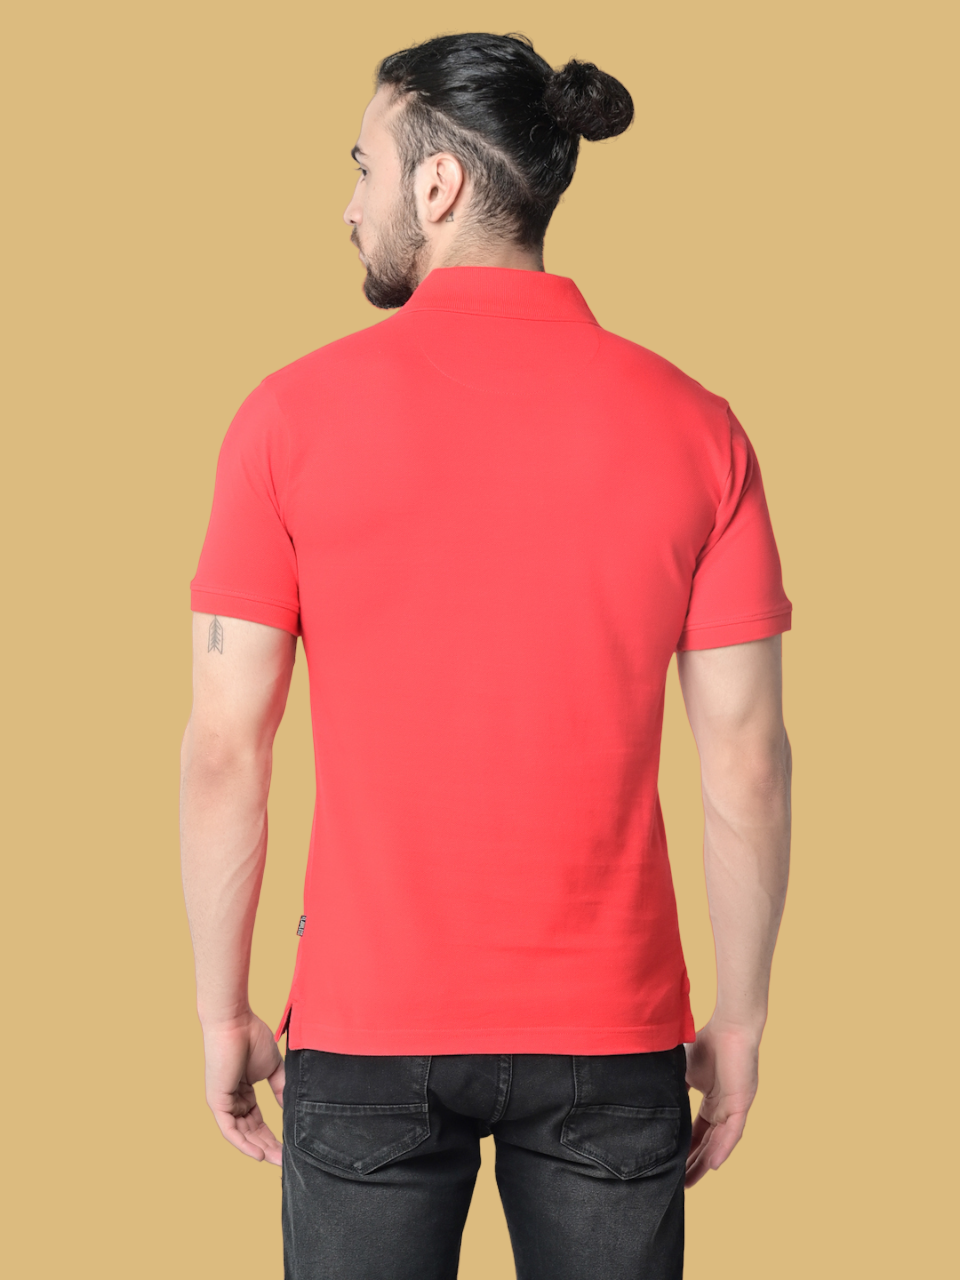 Flawless Men Red Organic Polo T-Shirt Being Flawless